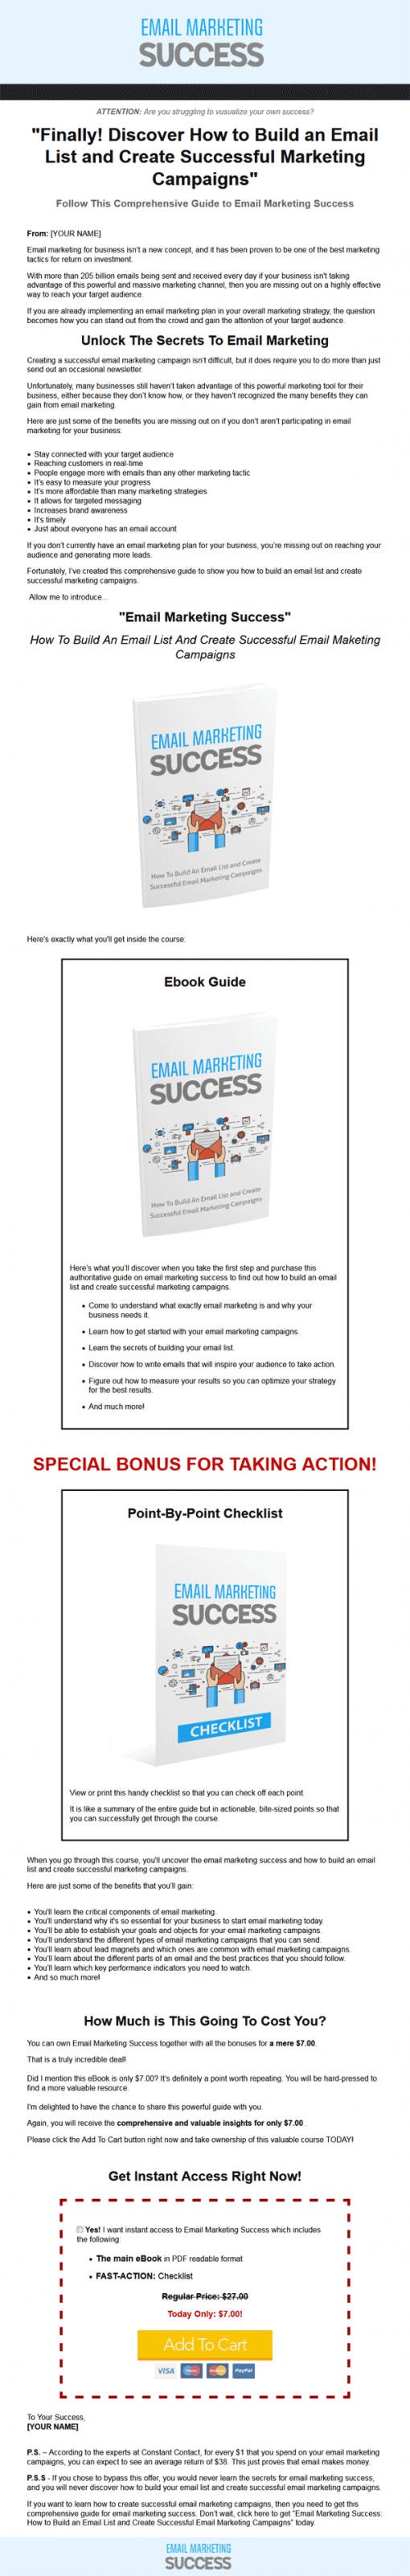 Email Marketing Success Ebook Package Master Resale Rights